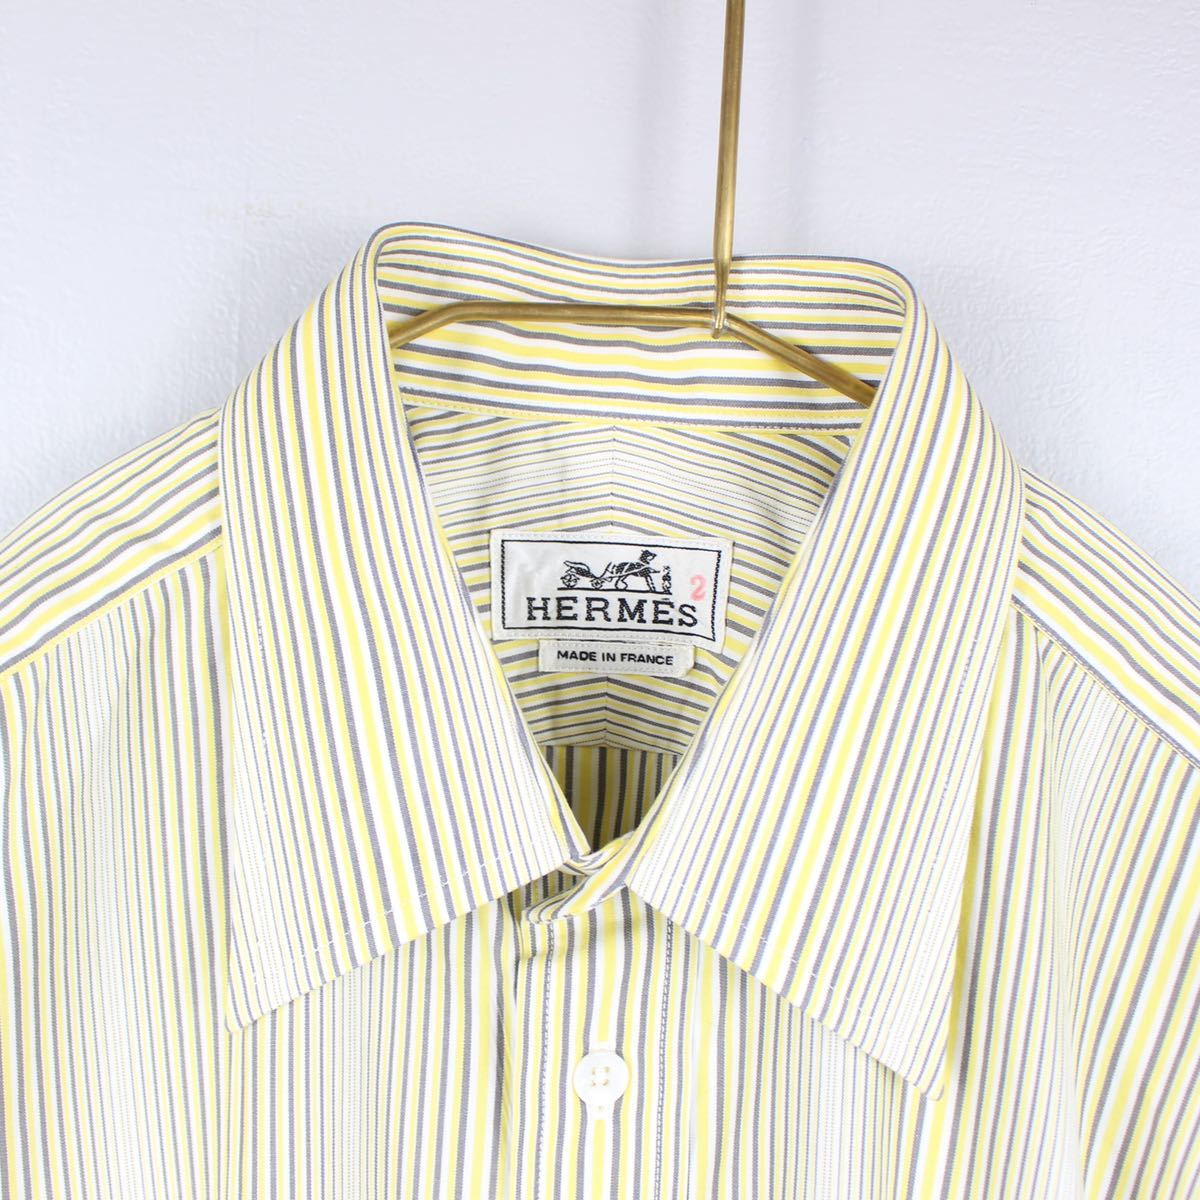 HERMES SERIE BUTTON STRIPE PATTERNED LONG SLEEVE SHIRT MADE IN